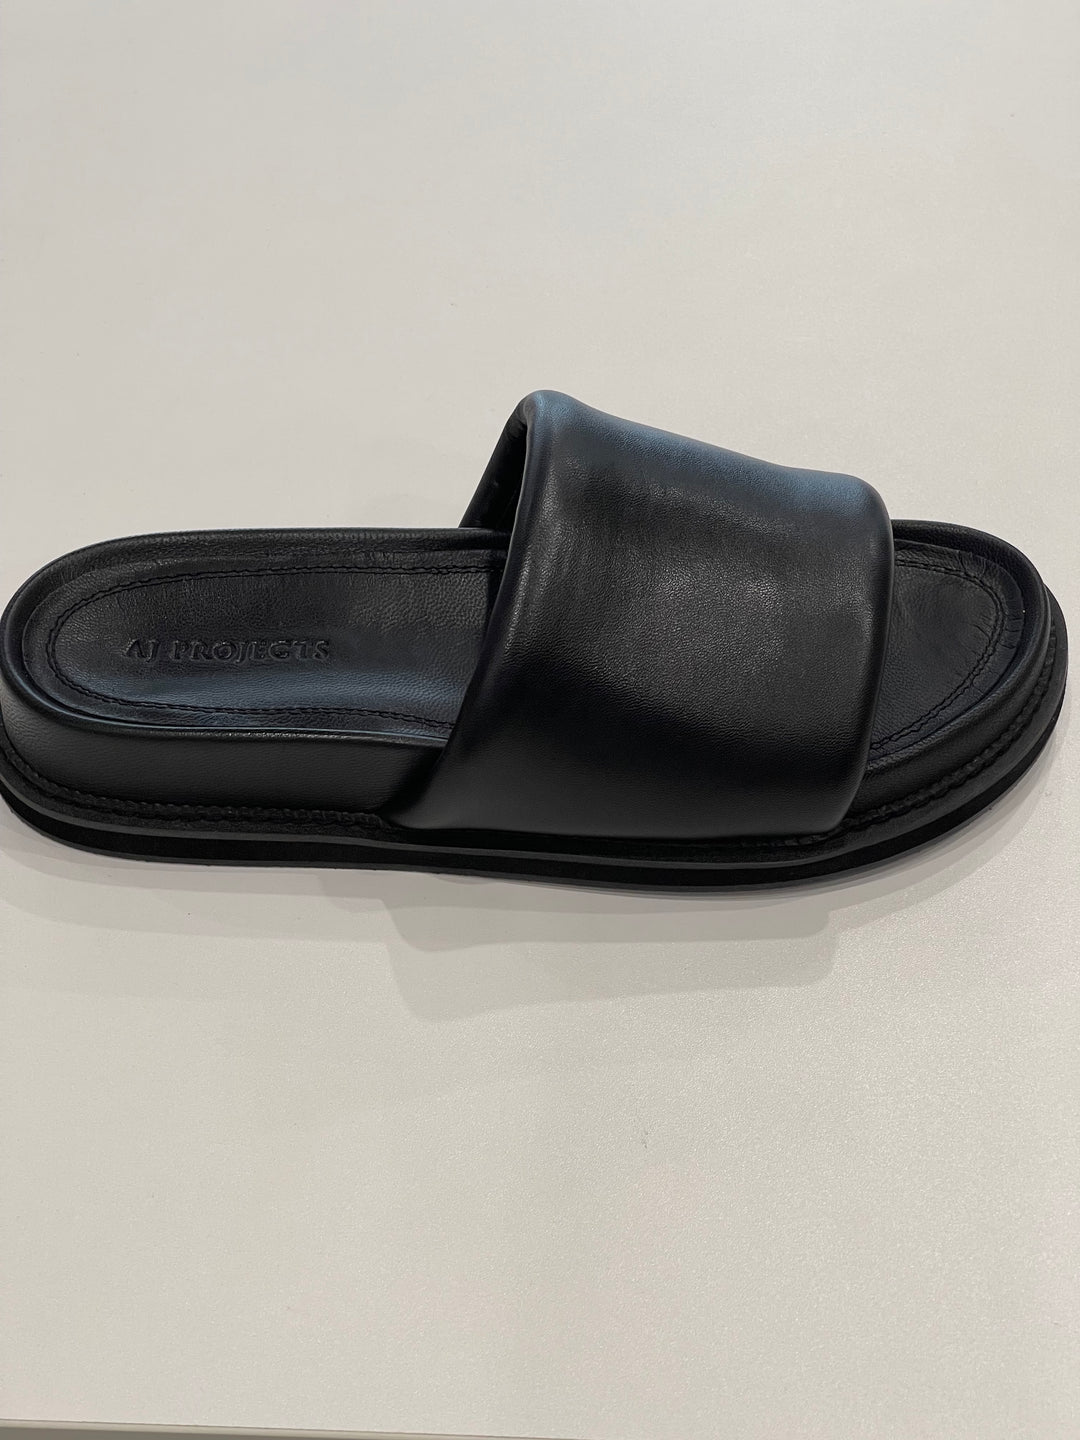 Black Puffy Slides shoes AJ Projects   